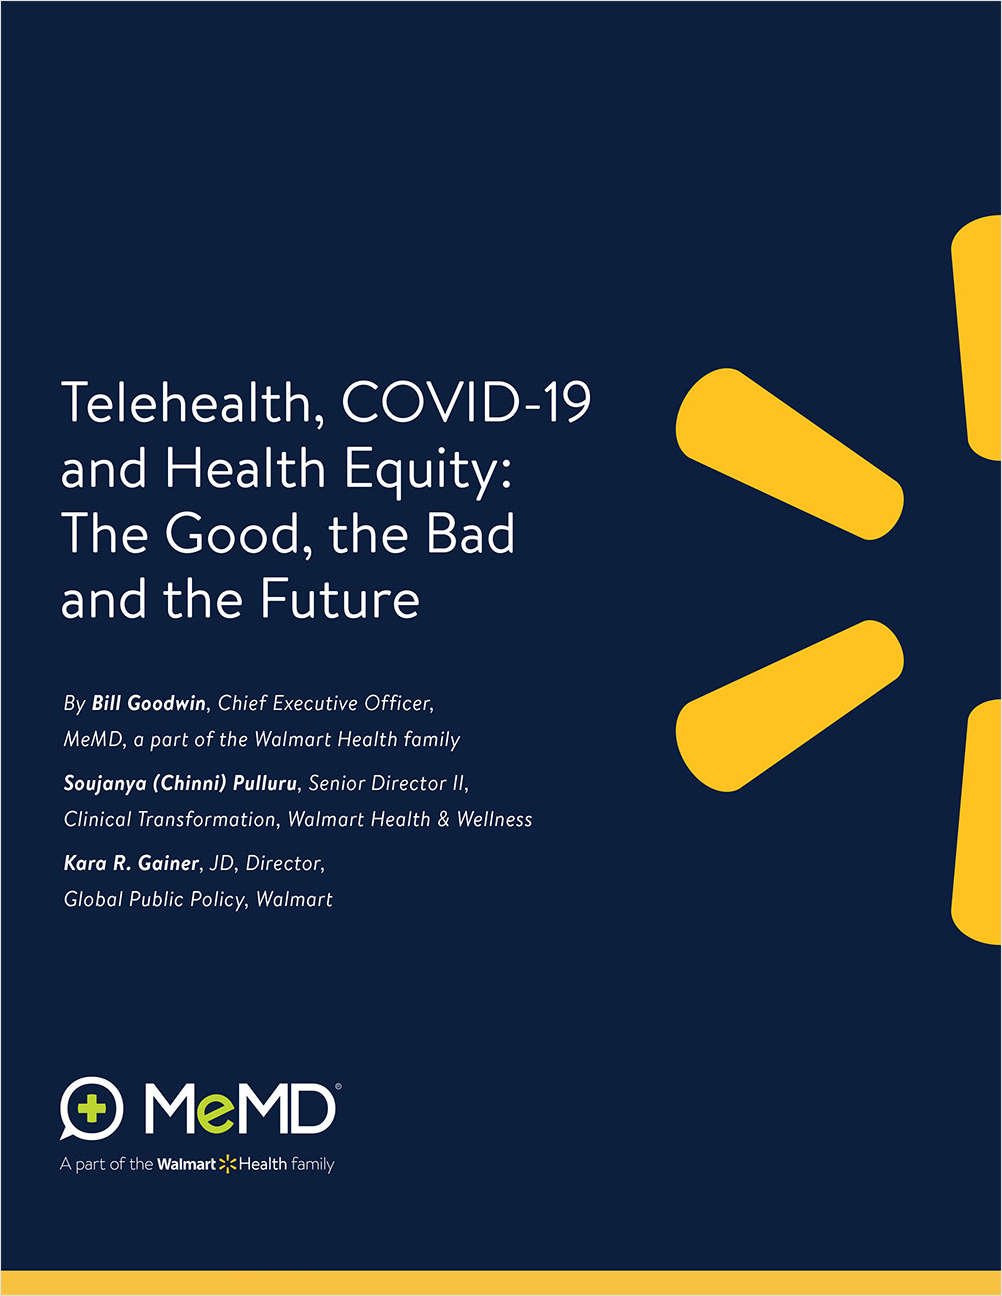 Telehealth, COVID-19 and Health Equity: The Good, the Bad and the Future link